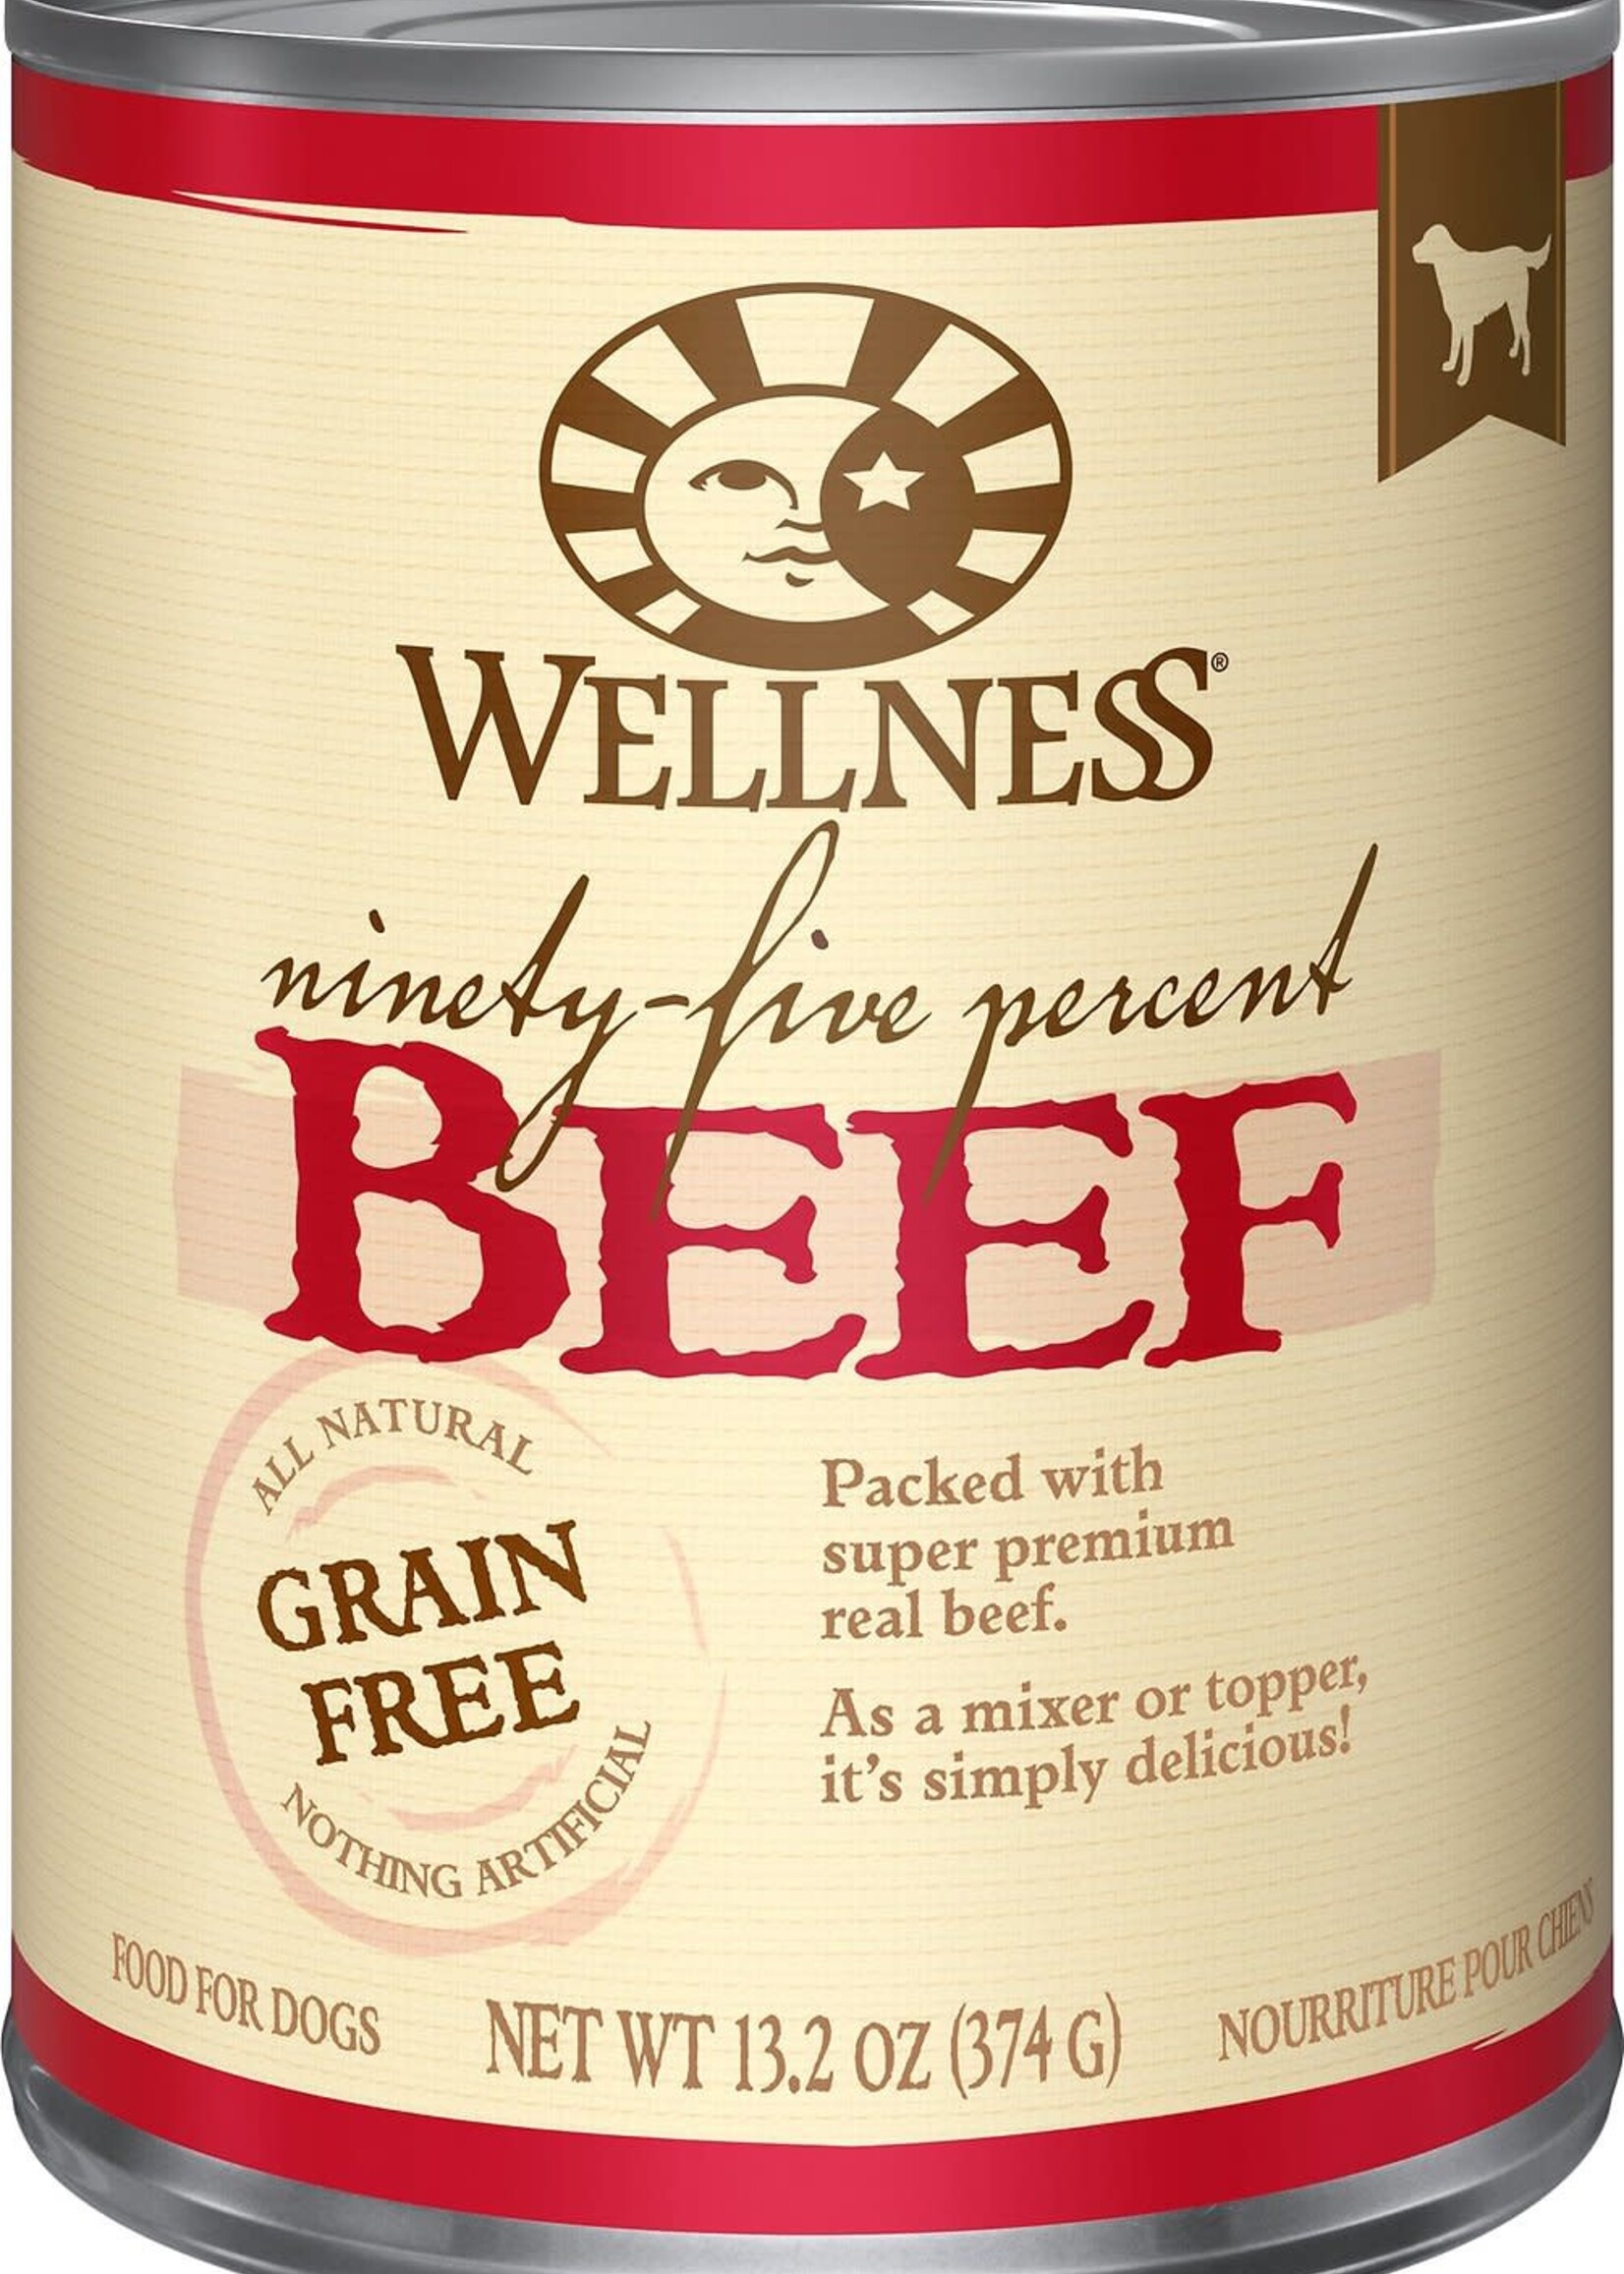 Wellness Wellness Ninety-Five Percent Beef Mixer or Topper Wet Canned Dog Food 13.2-oz